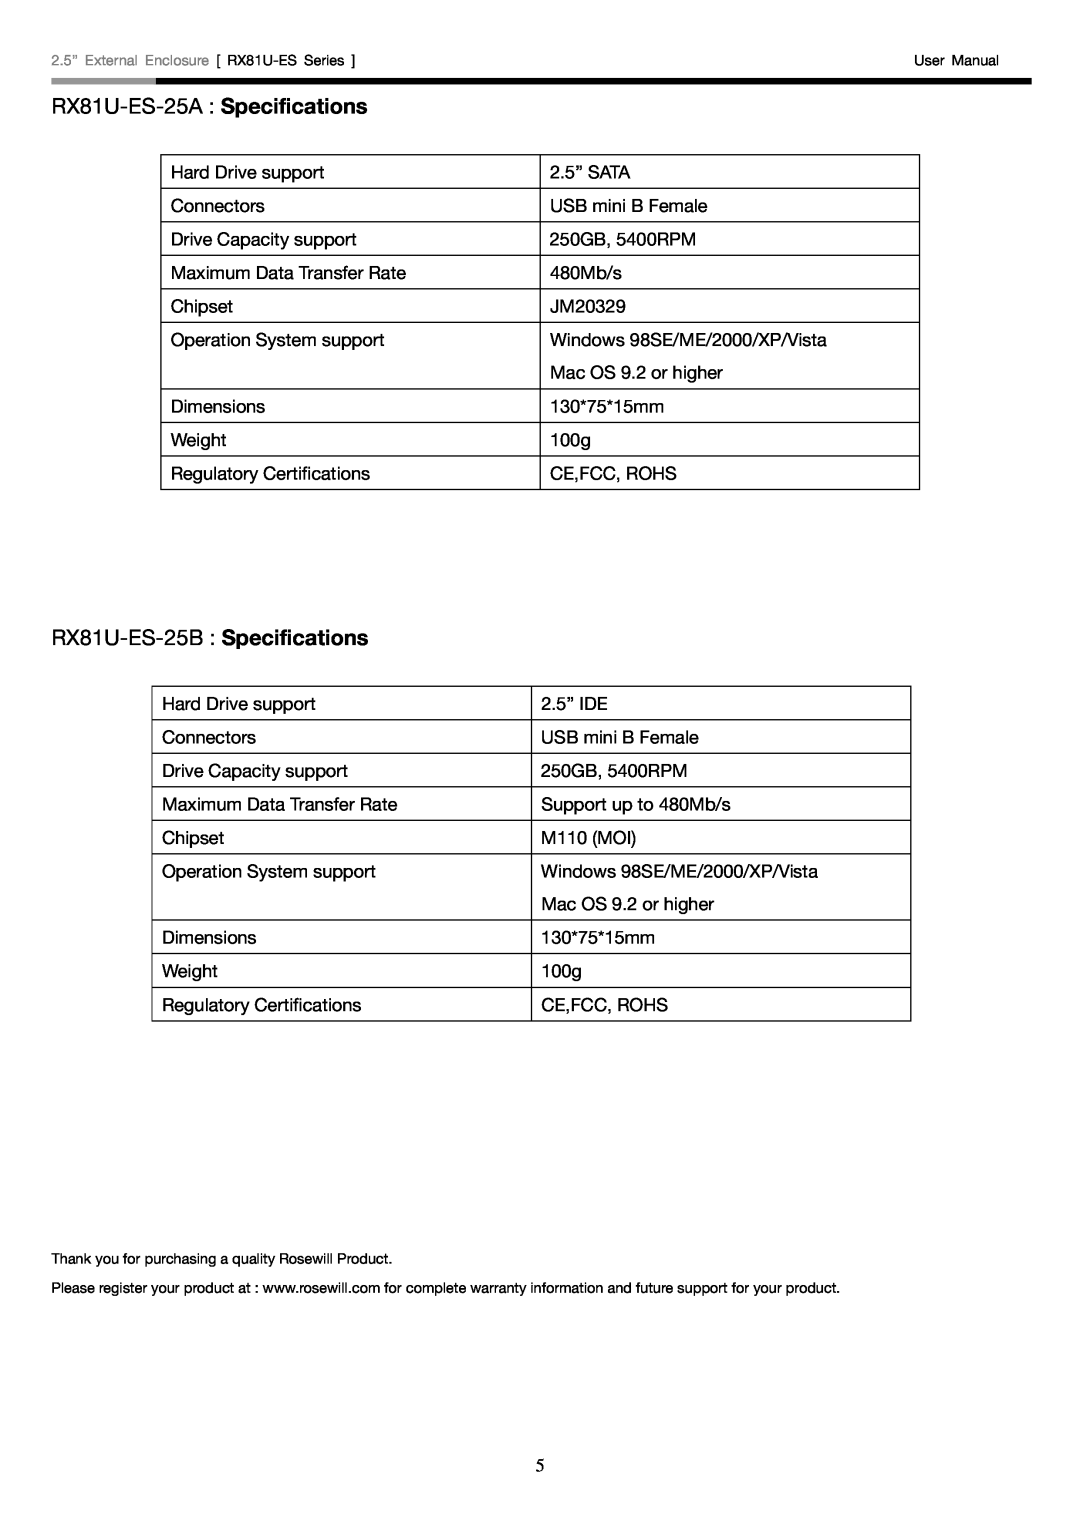 Rosewill user manual RX81U-ES-25A Specifications, RX81U-ES-25B Specifications 